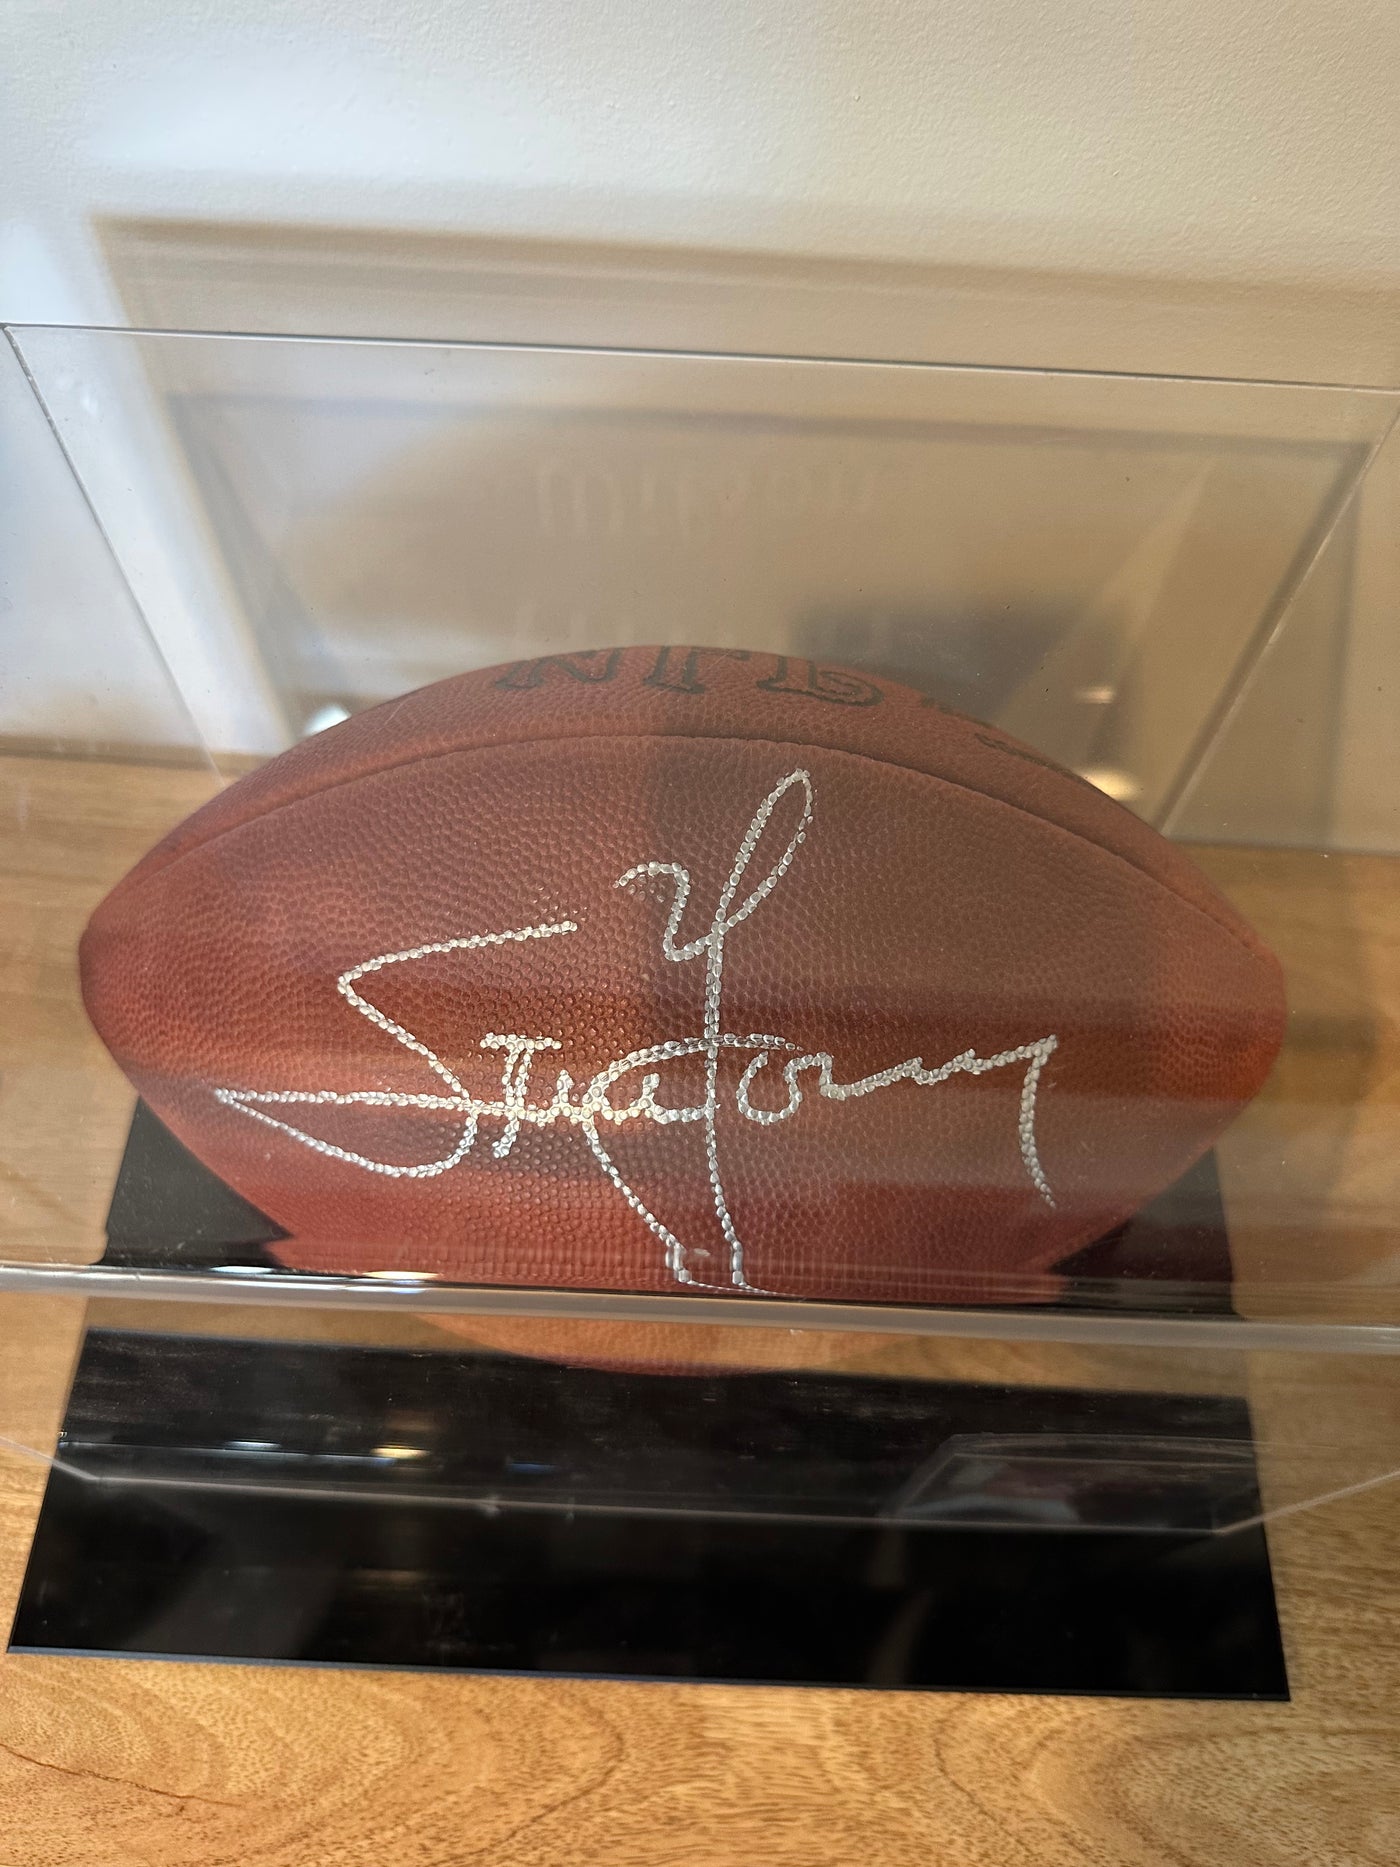 Steve Young Wilson Signed Football